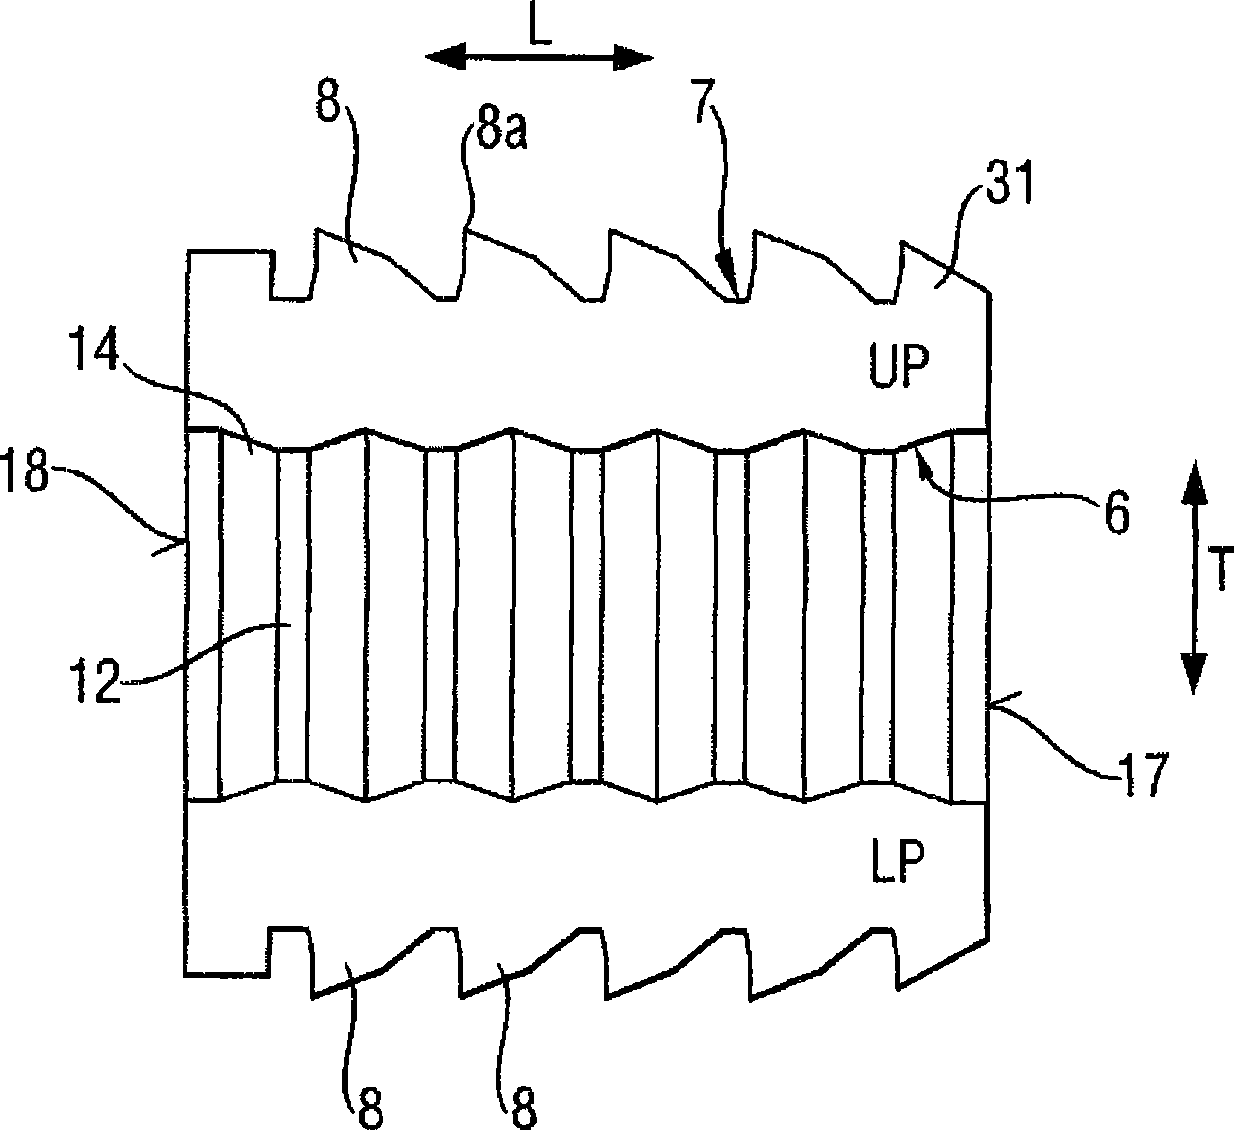 System for dynamically sealing at least one conduit through which a pipe or cable extends